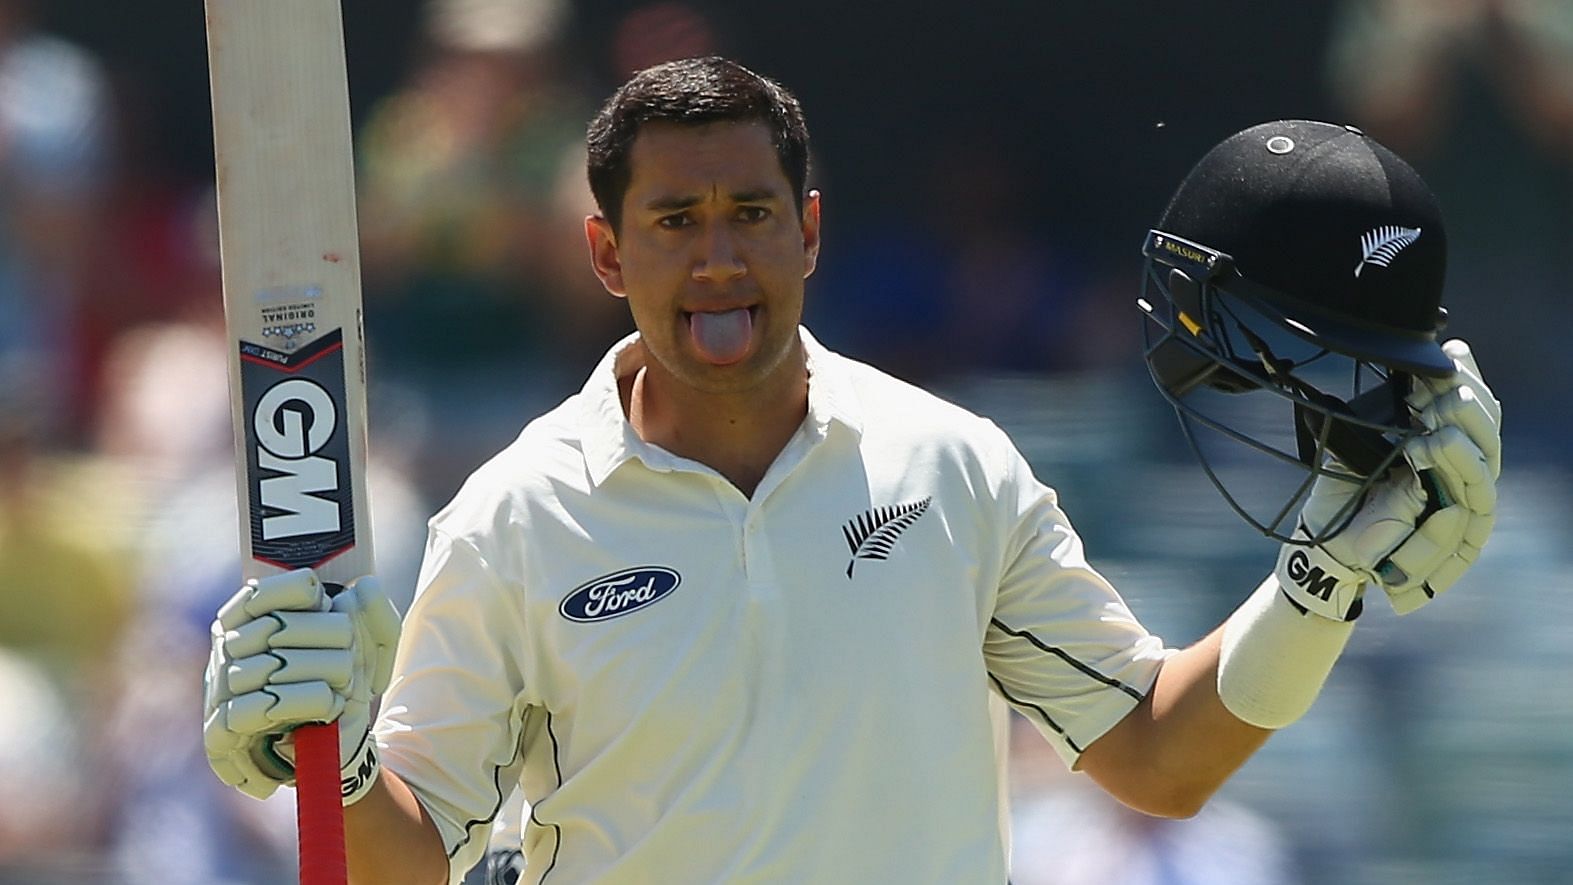 Ross Taylor, who made his debut in 2006, has so far played 99 Tests, 231 ODIs and 100 T20Is.